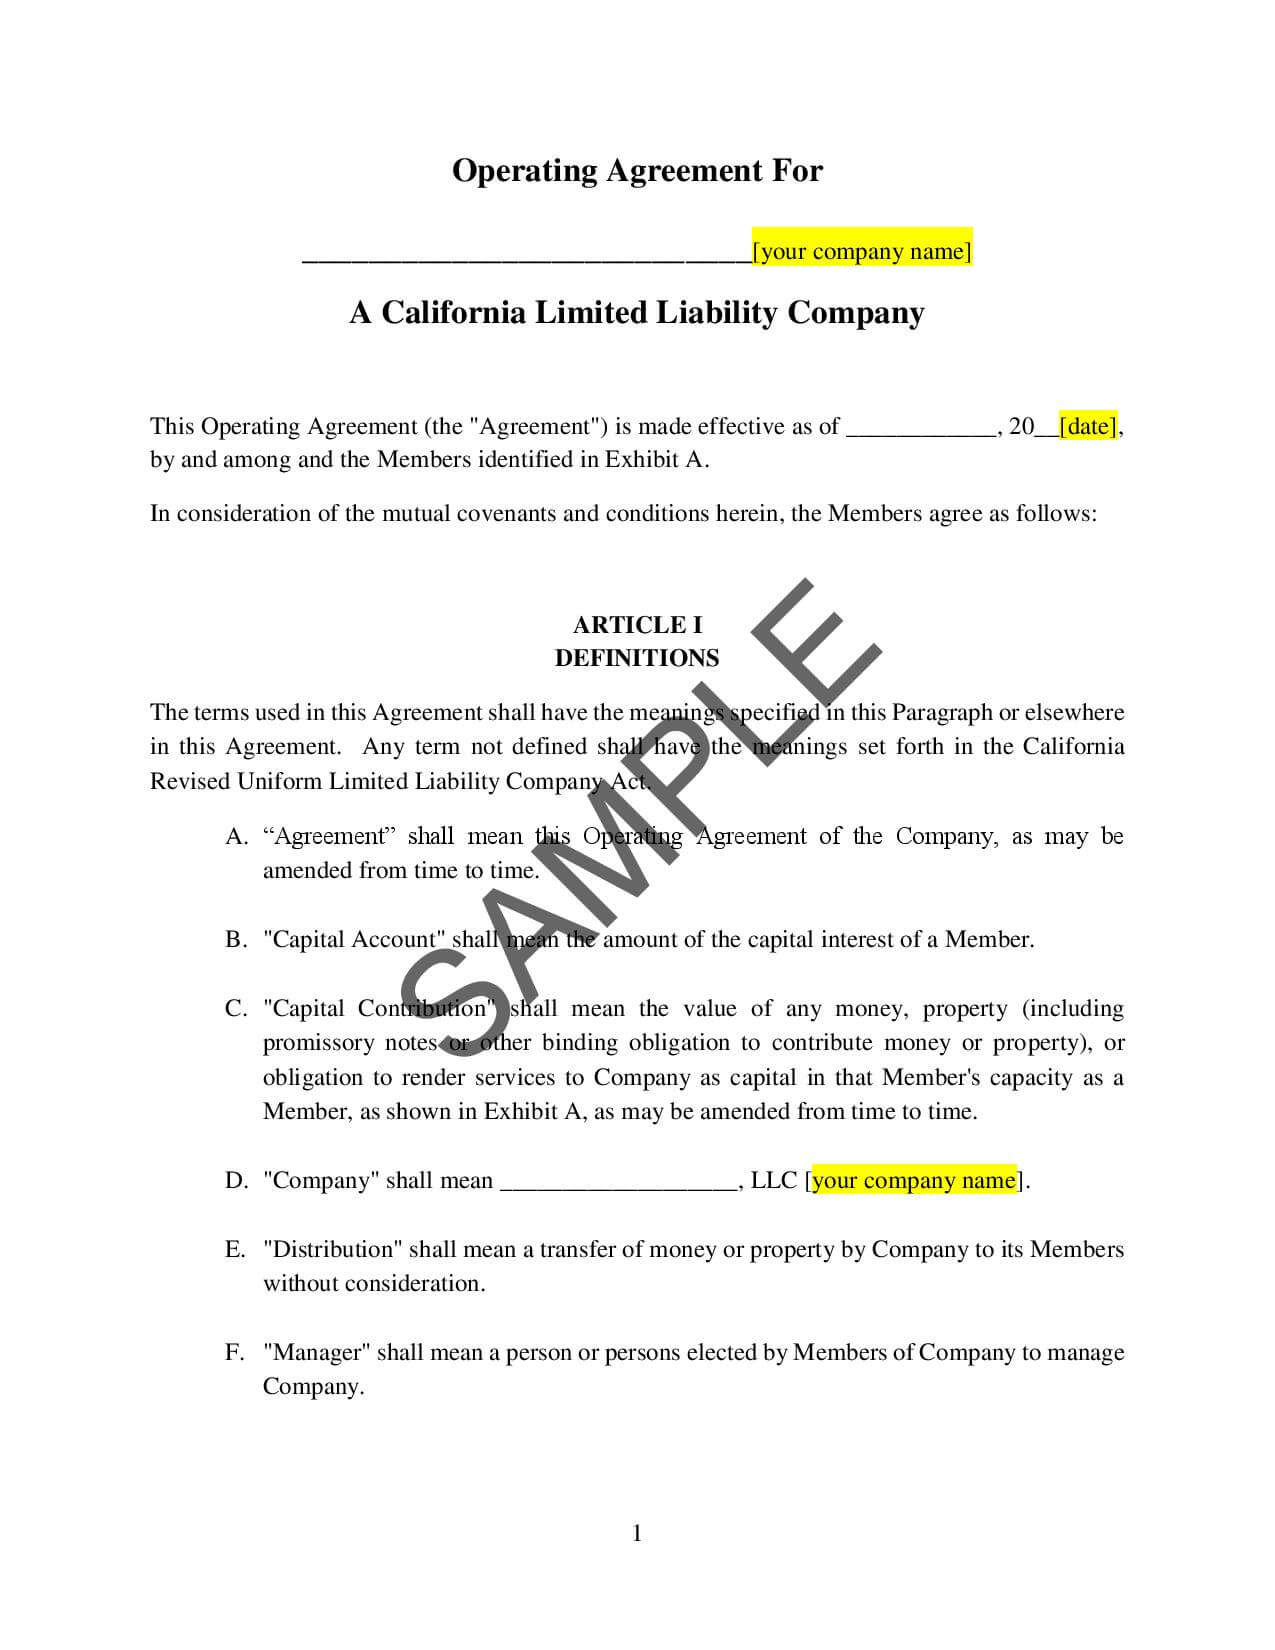 Llc Operating Agreements Operating Agreement For Llc California Multi Member Manager Managed